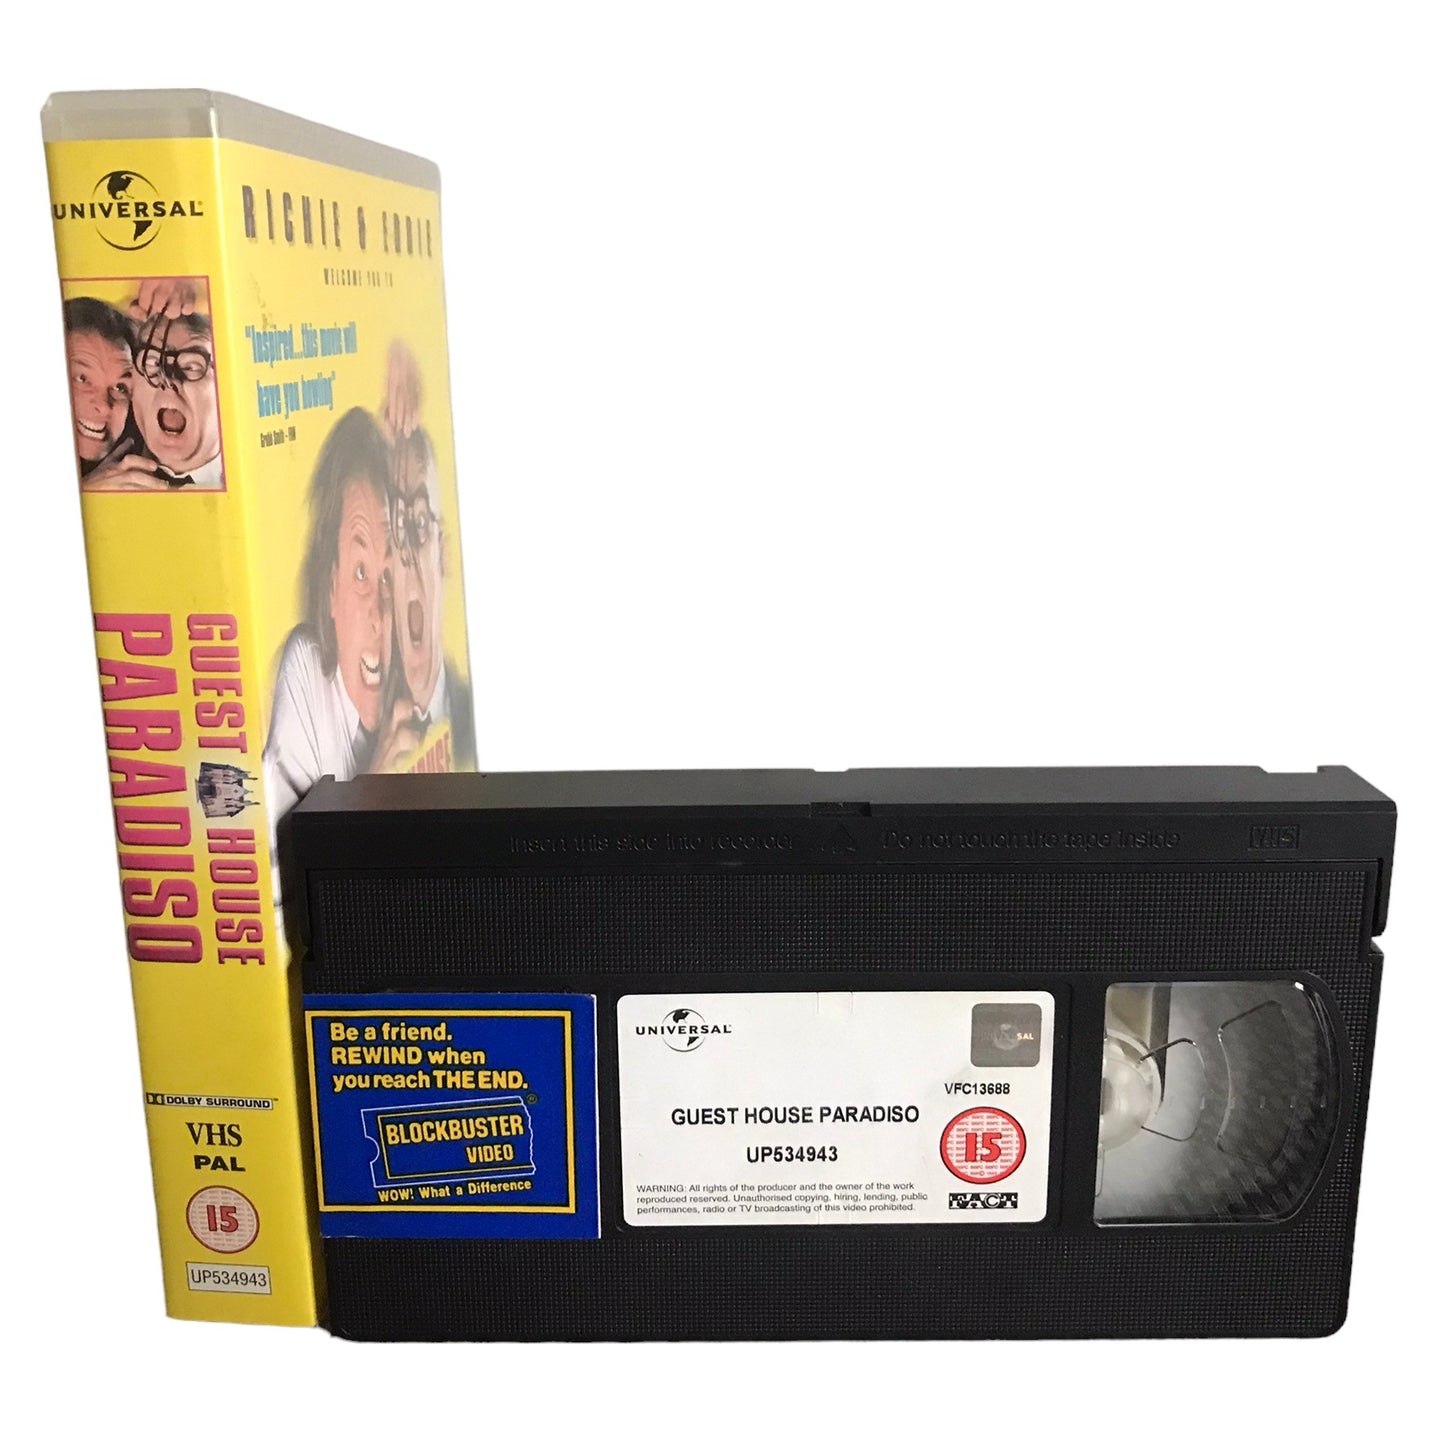 Guest House Paradiso - Richie and Eddie - Universal - Large Box - Pal - VHS-